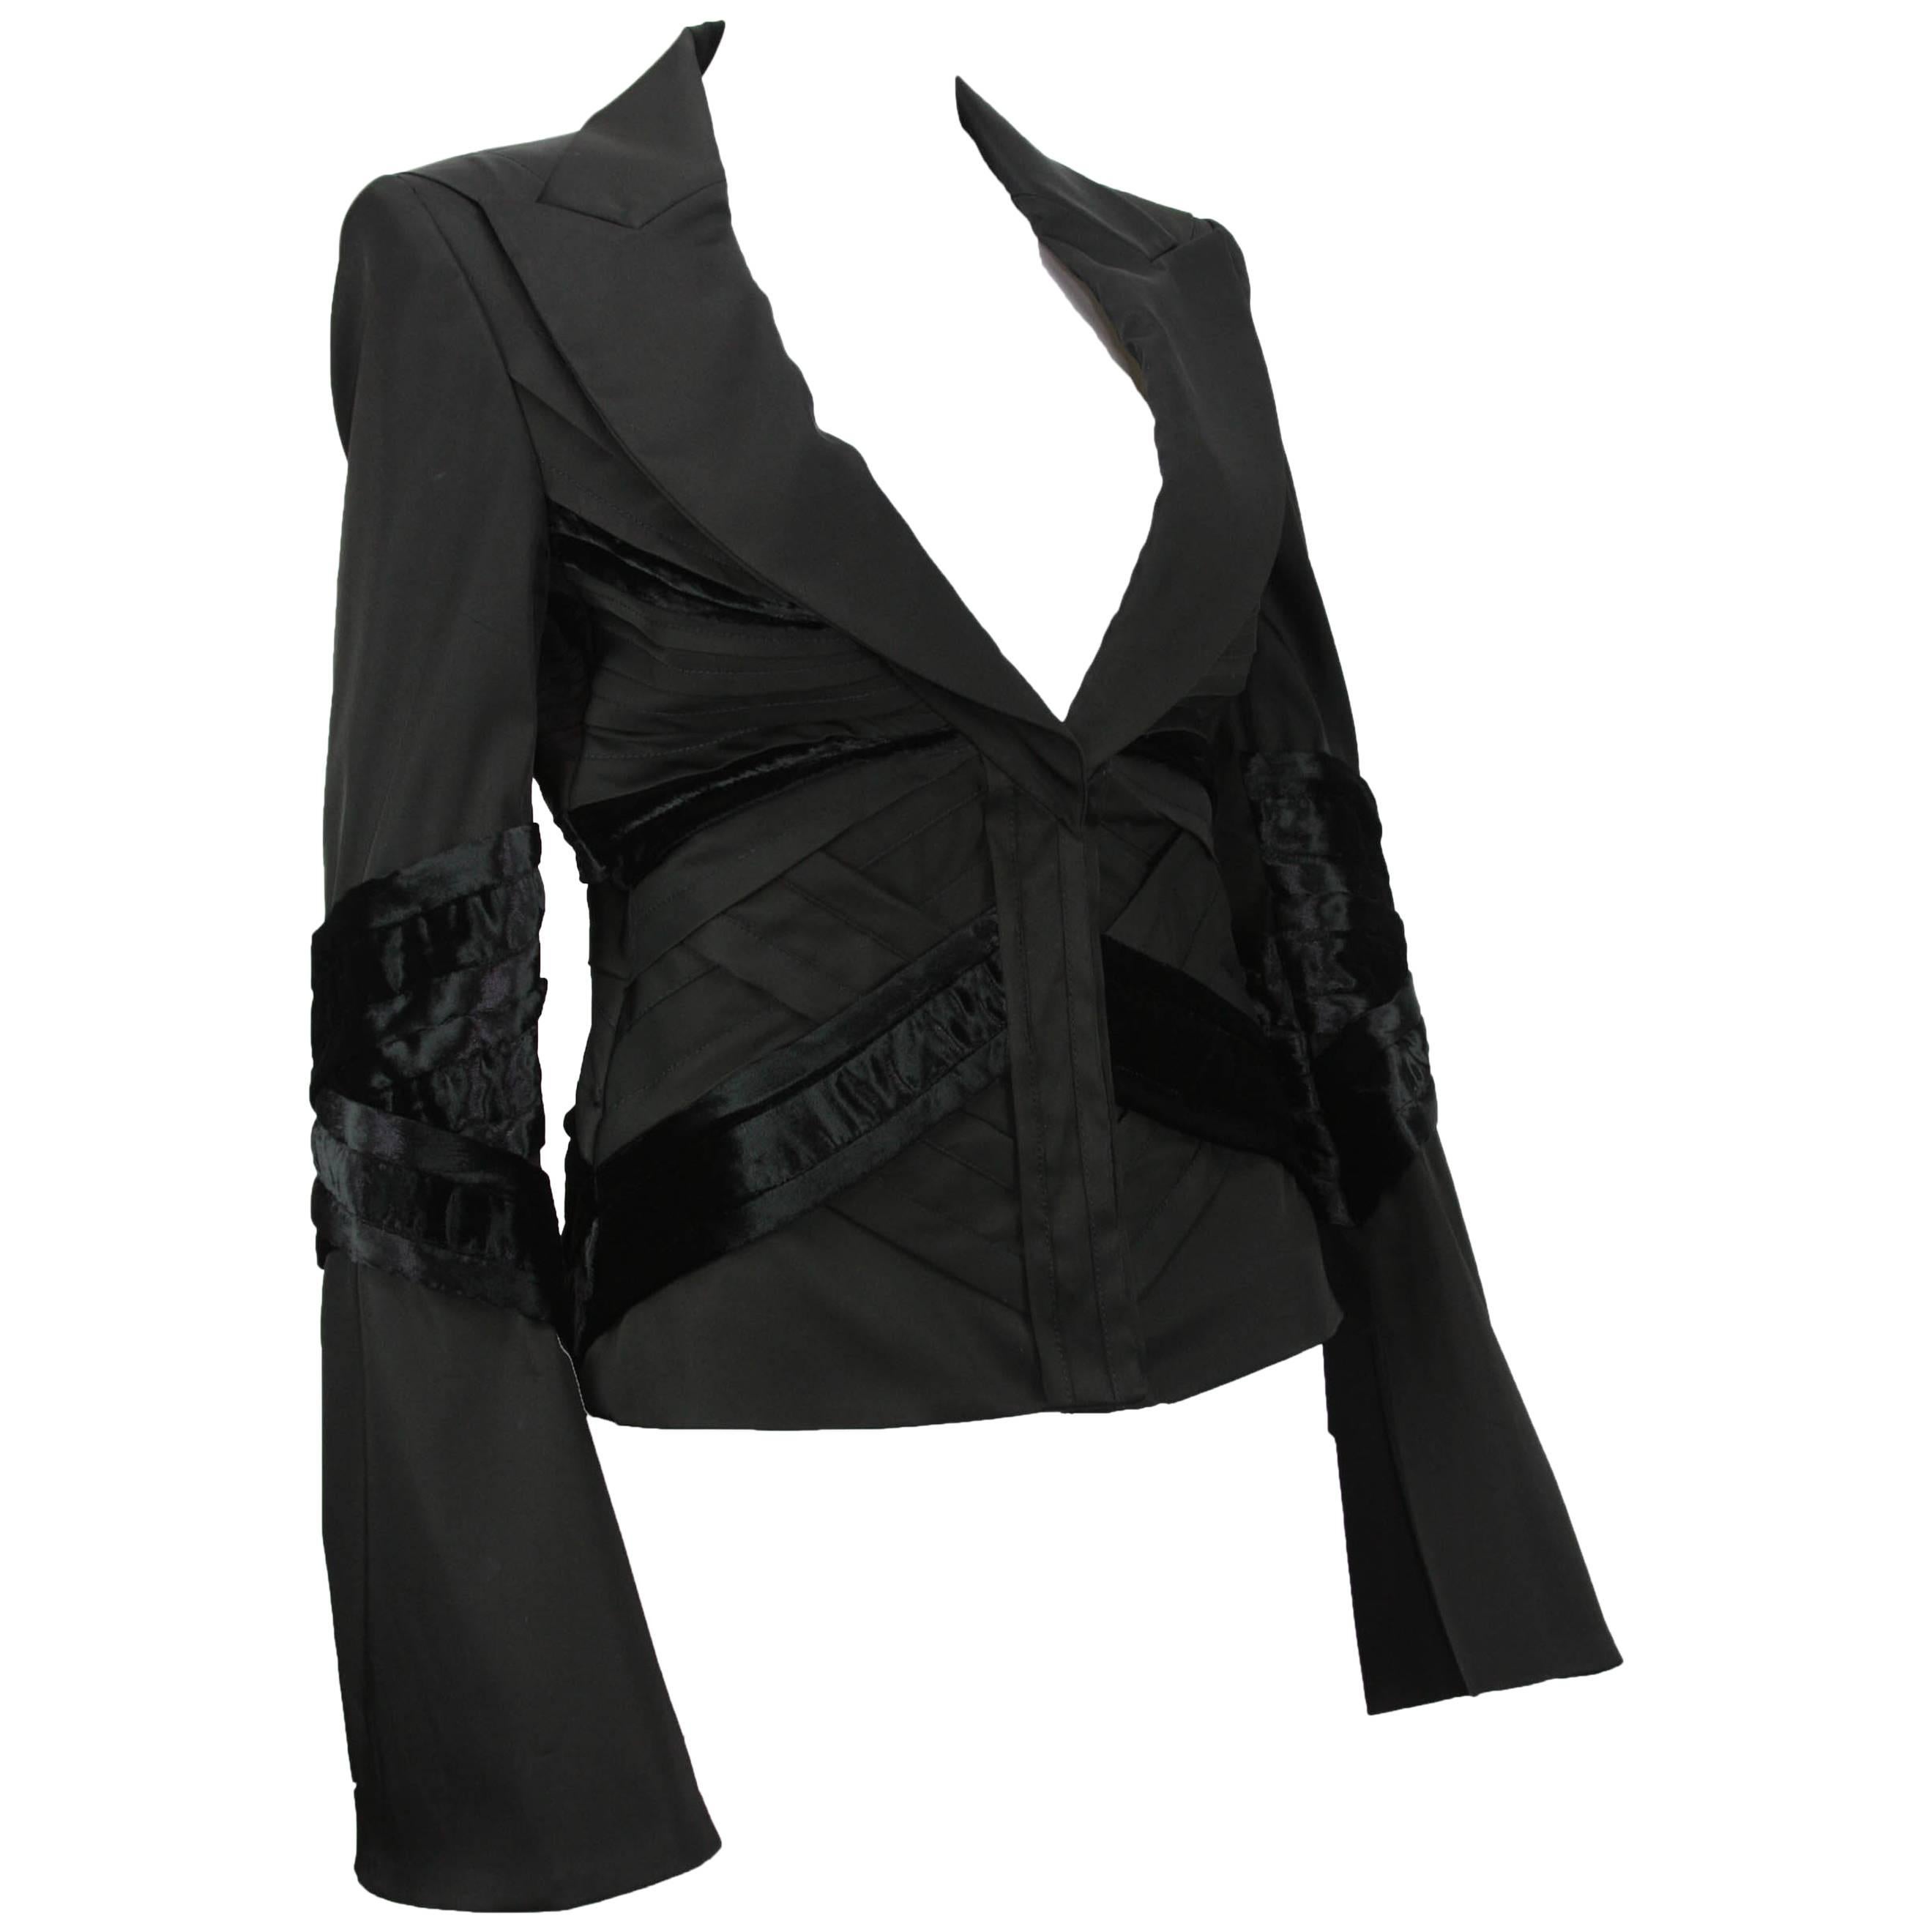 GUCCI by TOM FORD 2004 Collection Black Silk Taffeta Velvet Jacket size S - US 4 For Sale